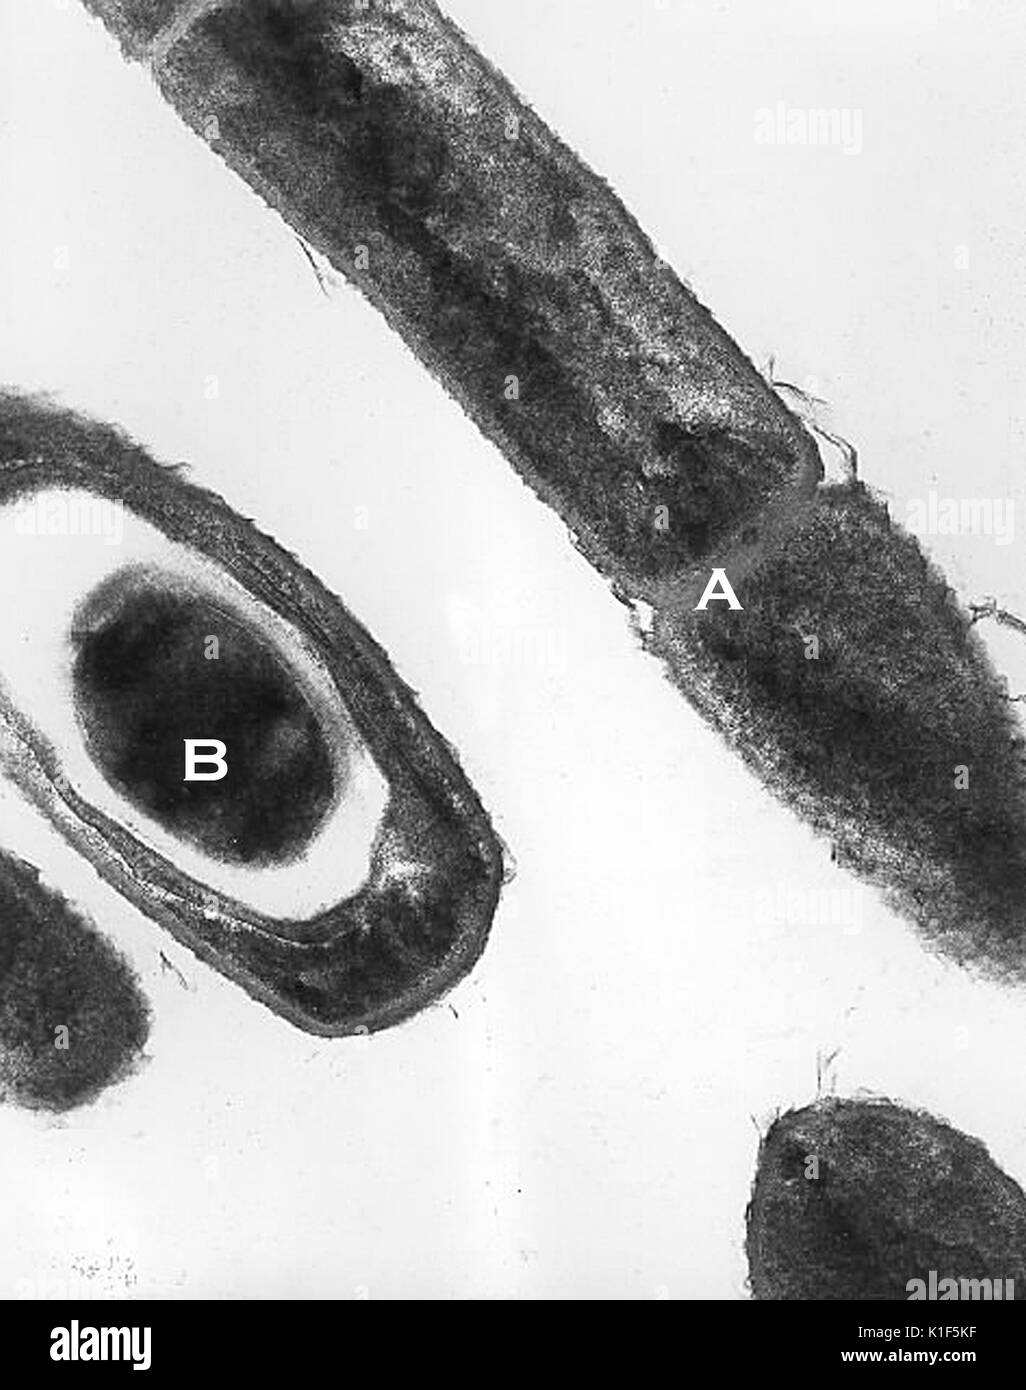 Transmission electron micrograph of Bacillus anthracis . Transmission electron micrographic image of Bacillus anthracis from an anthrax culture, showing cell division (A), and spores (B). Image courtesy CDC/Dr. Sherif Zaki, Elizabeth White, 2001. Stock Photo